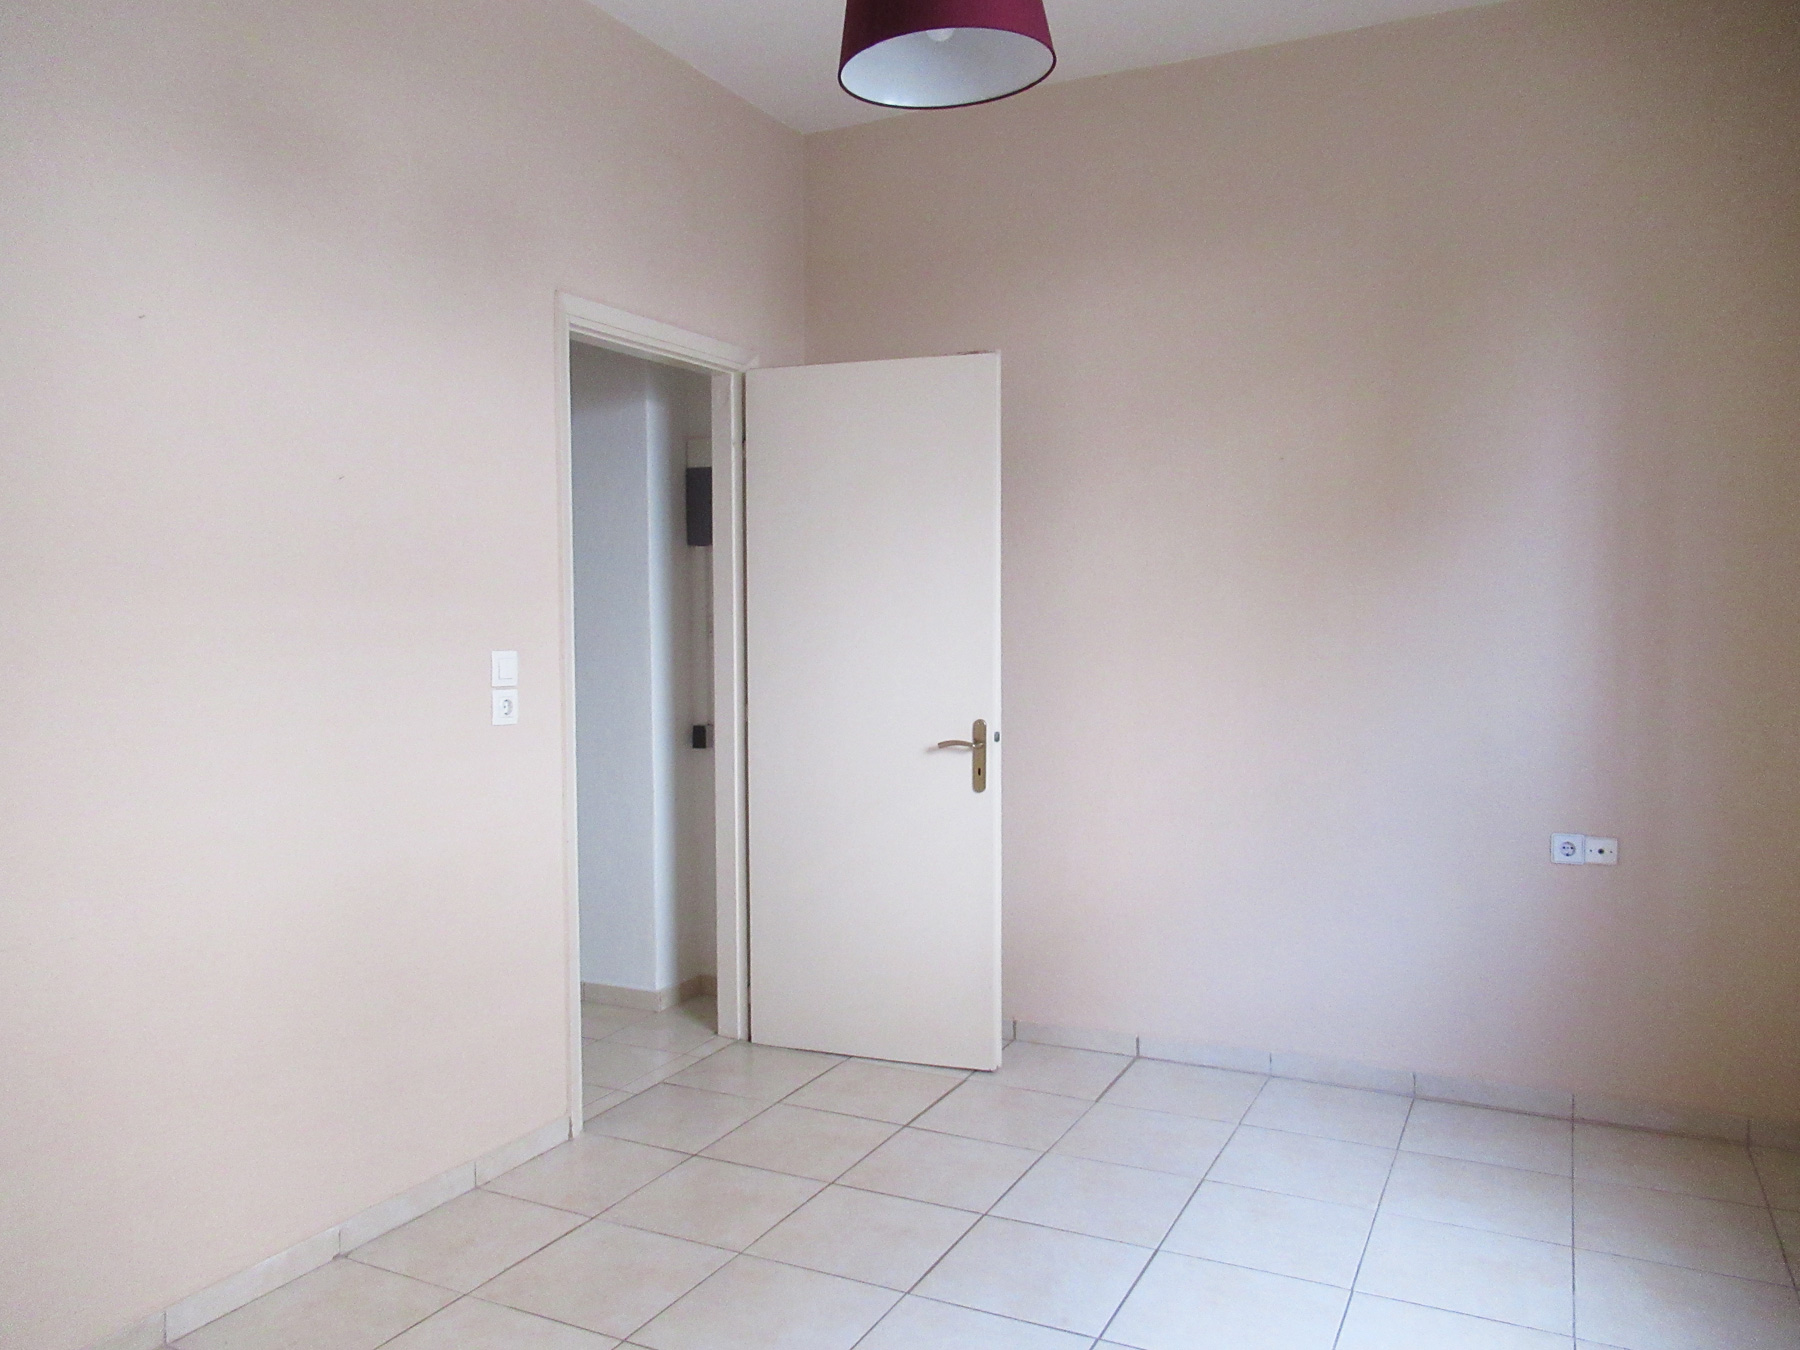 For rent bright two bedroom apartment of 45 sq.m. at the center near Dodonis Avenue.